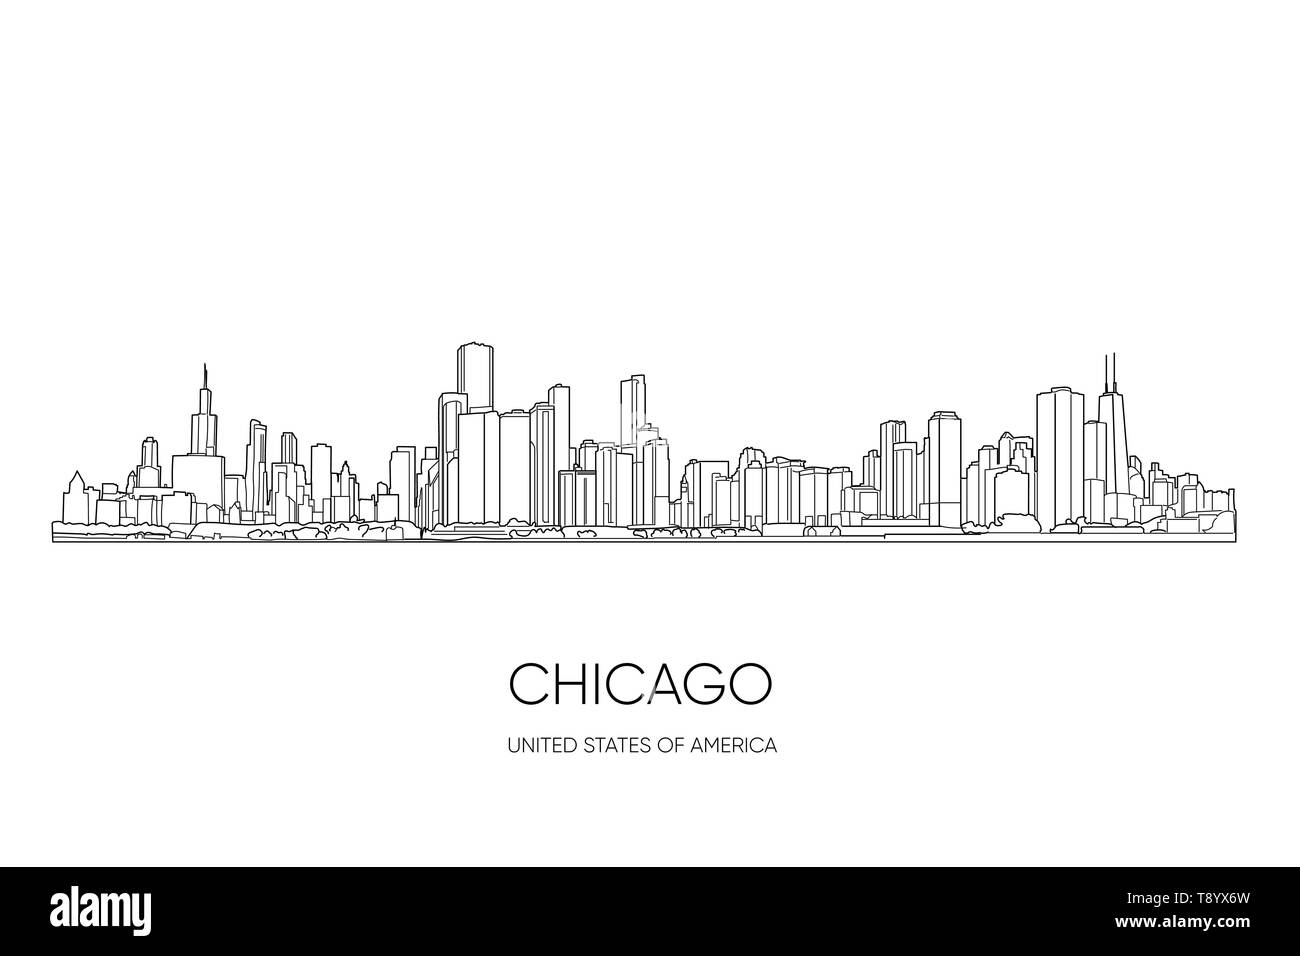 Chicago skyline, Illinois, USA. Hand drawn vector illustration, perfect for postcards or souvenirs. Black and white outlines Stock Vector